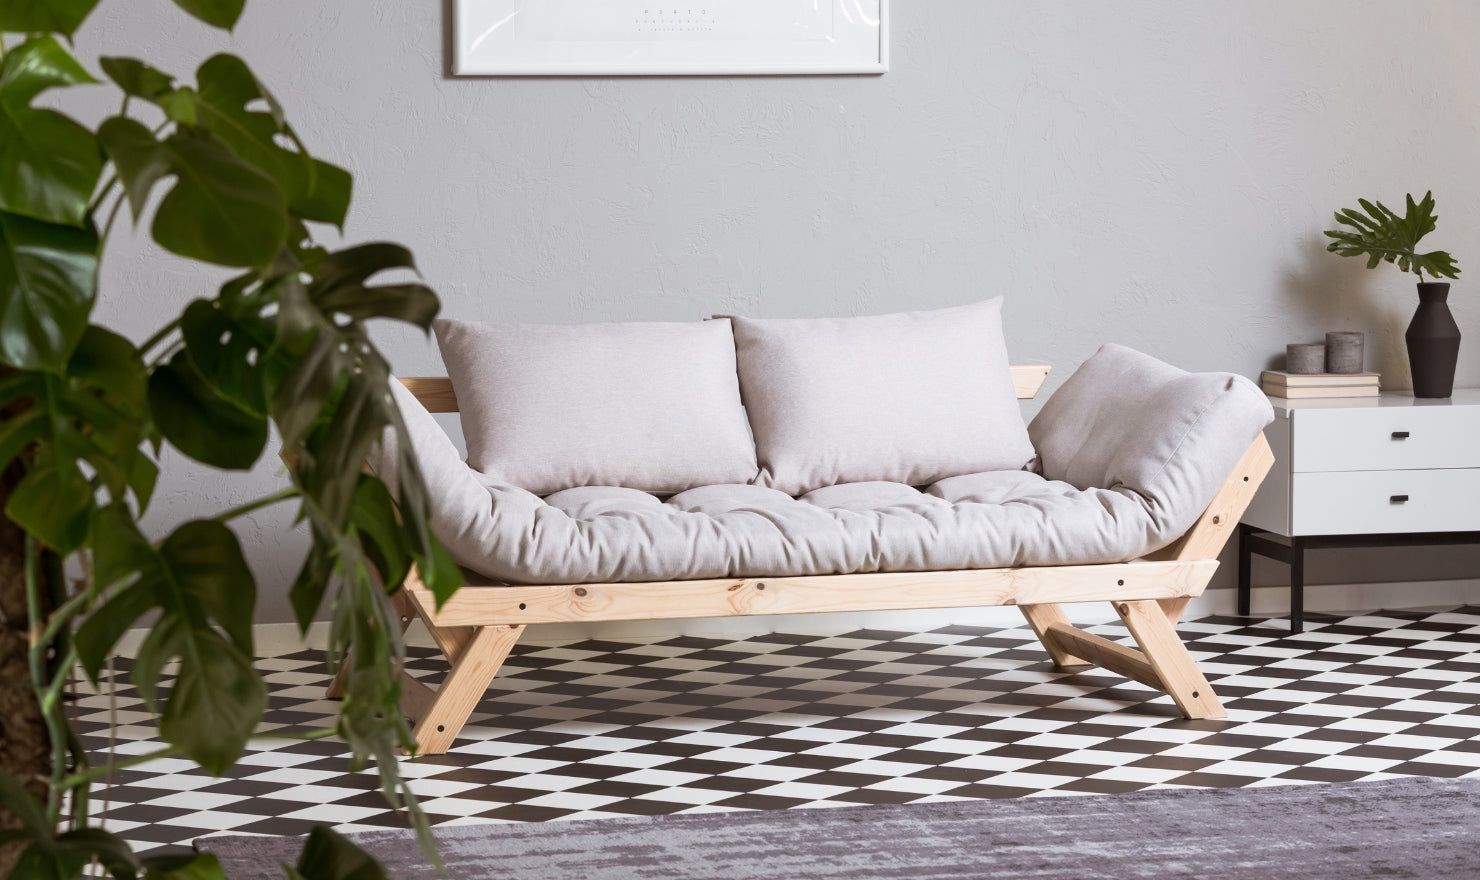 Sofa Beds Vs Futons - Are you on a budget